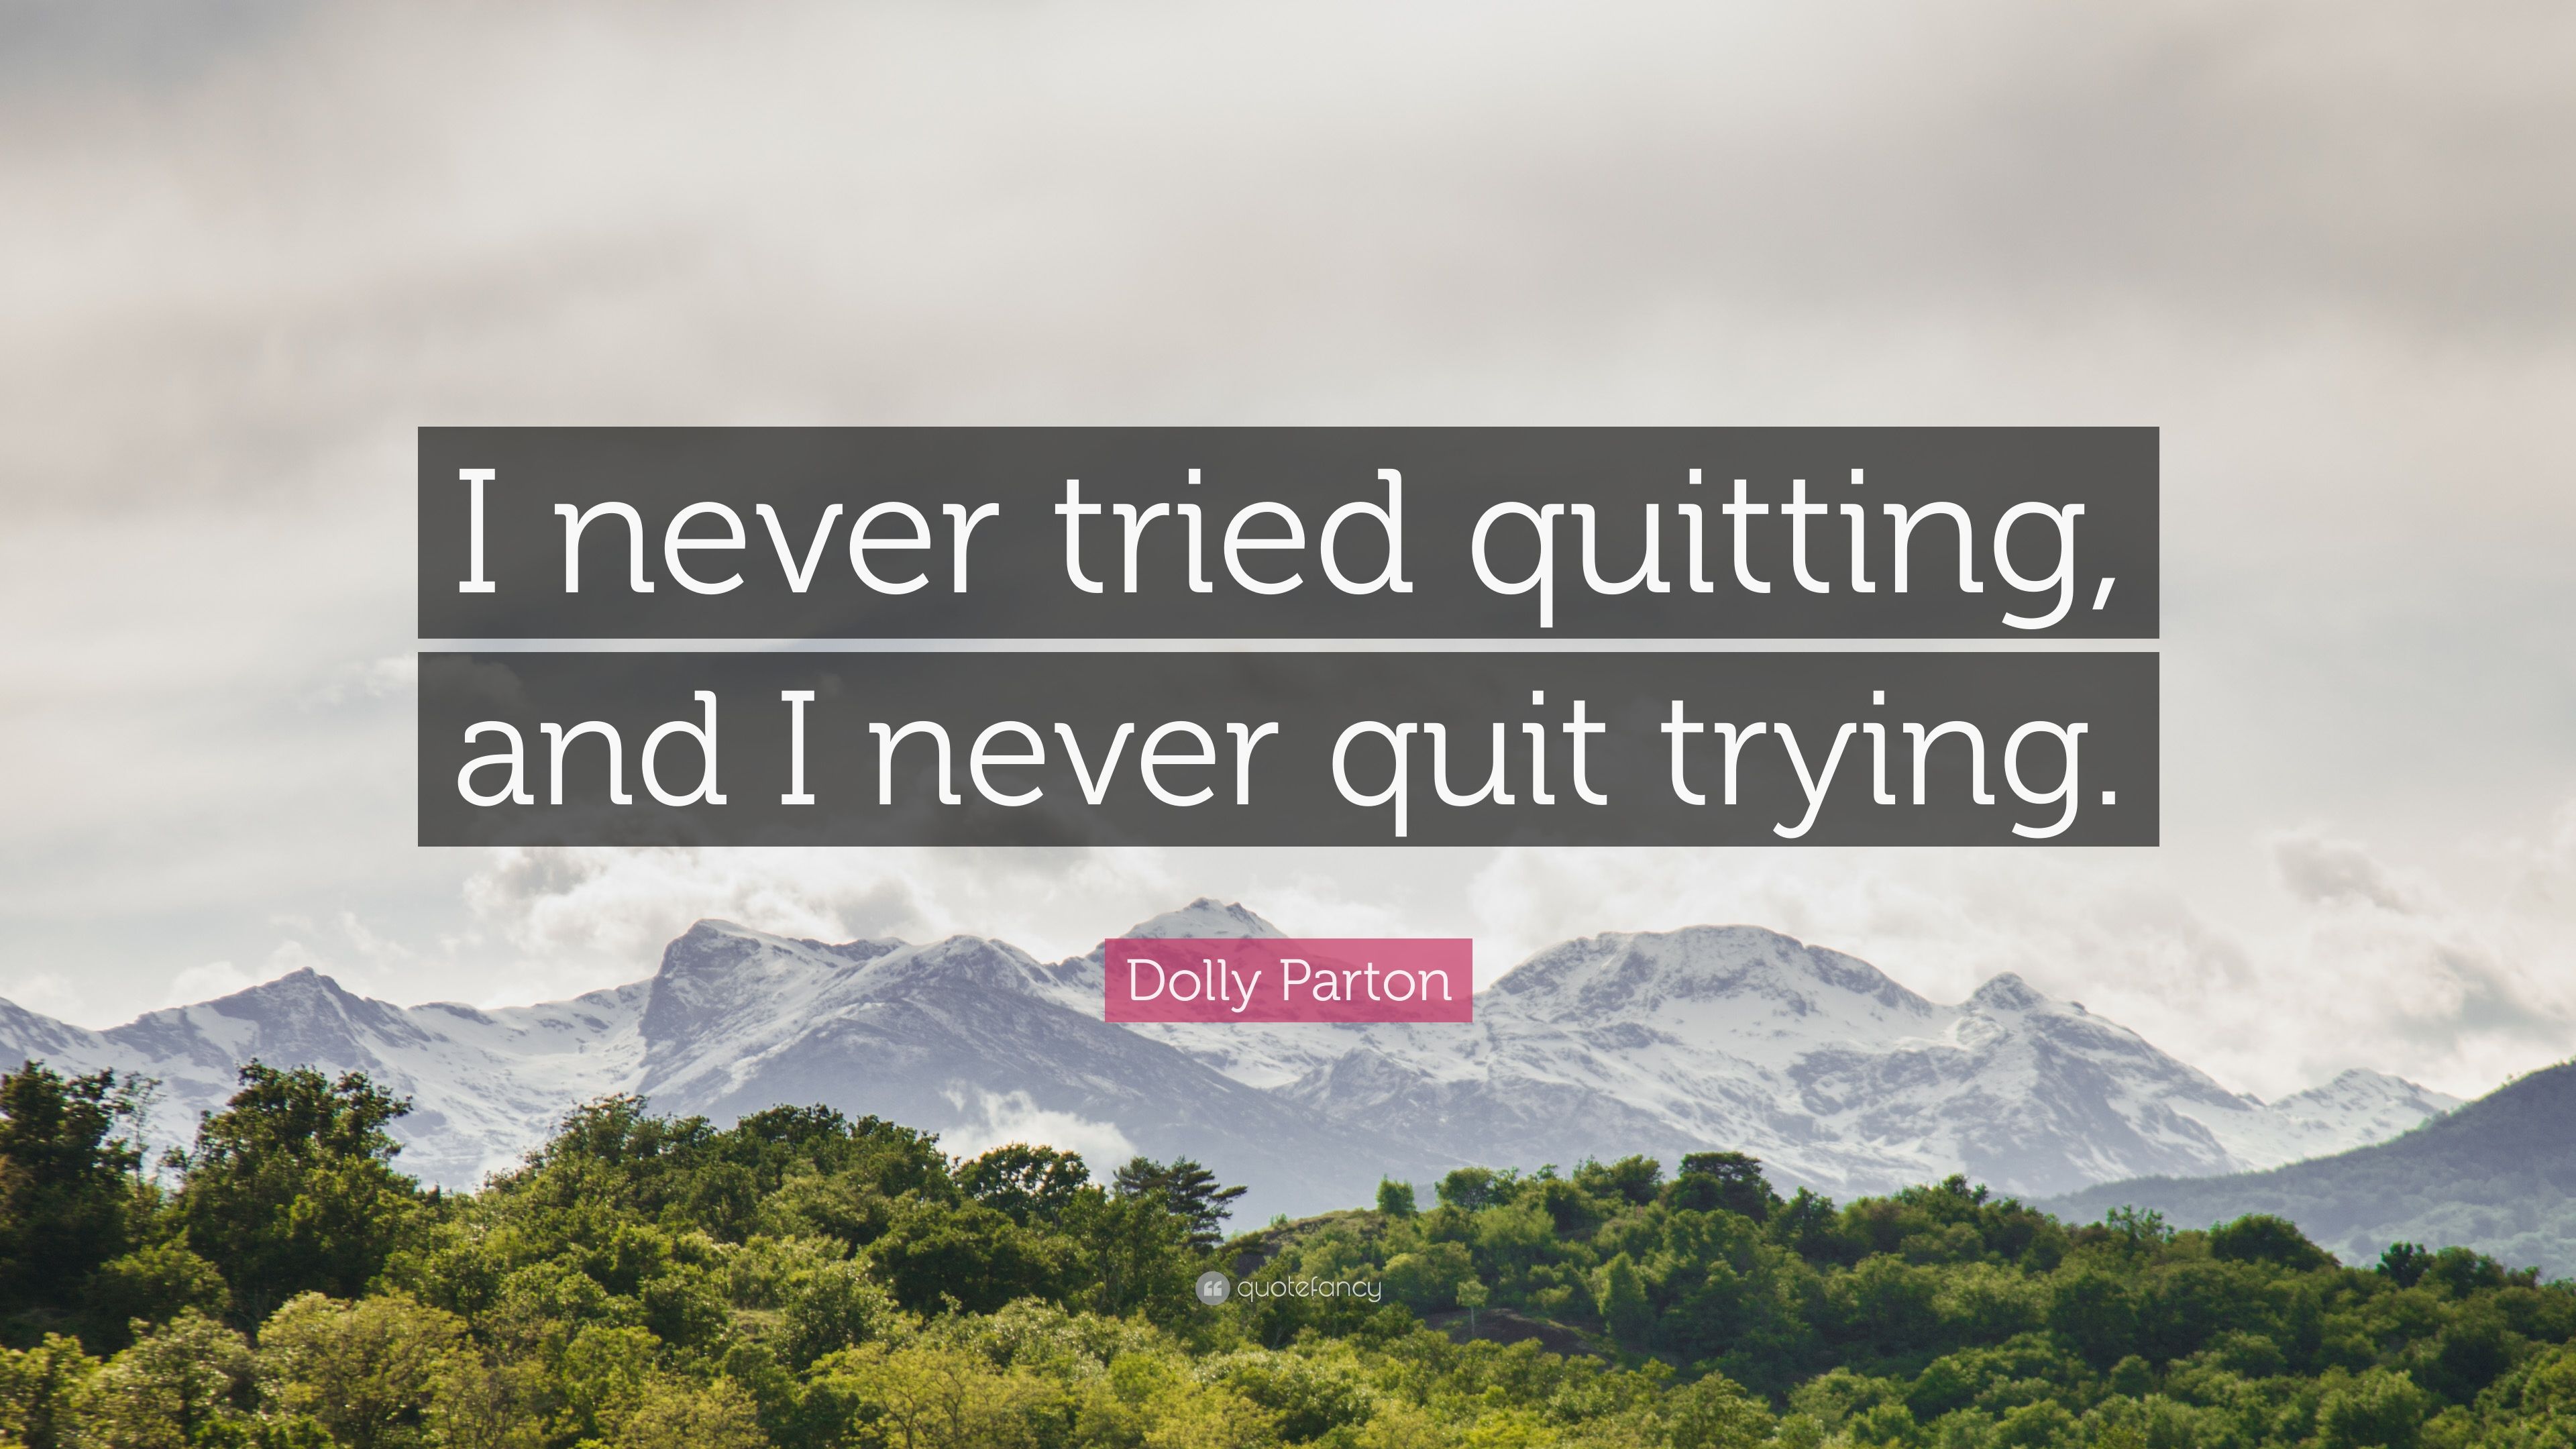 Dolly Parton Quote: “I never tried quitting, and I never quit trying.” (12 wallpaper)